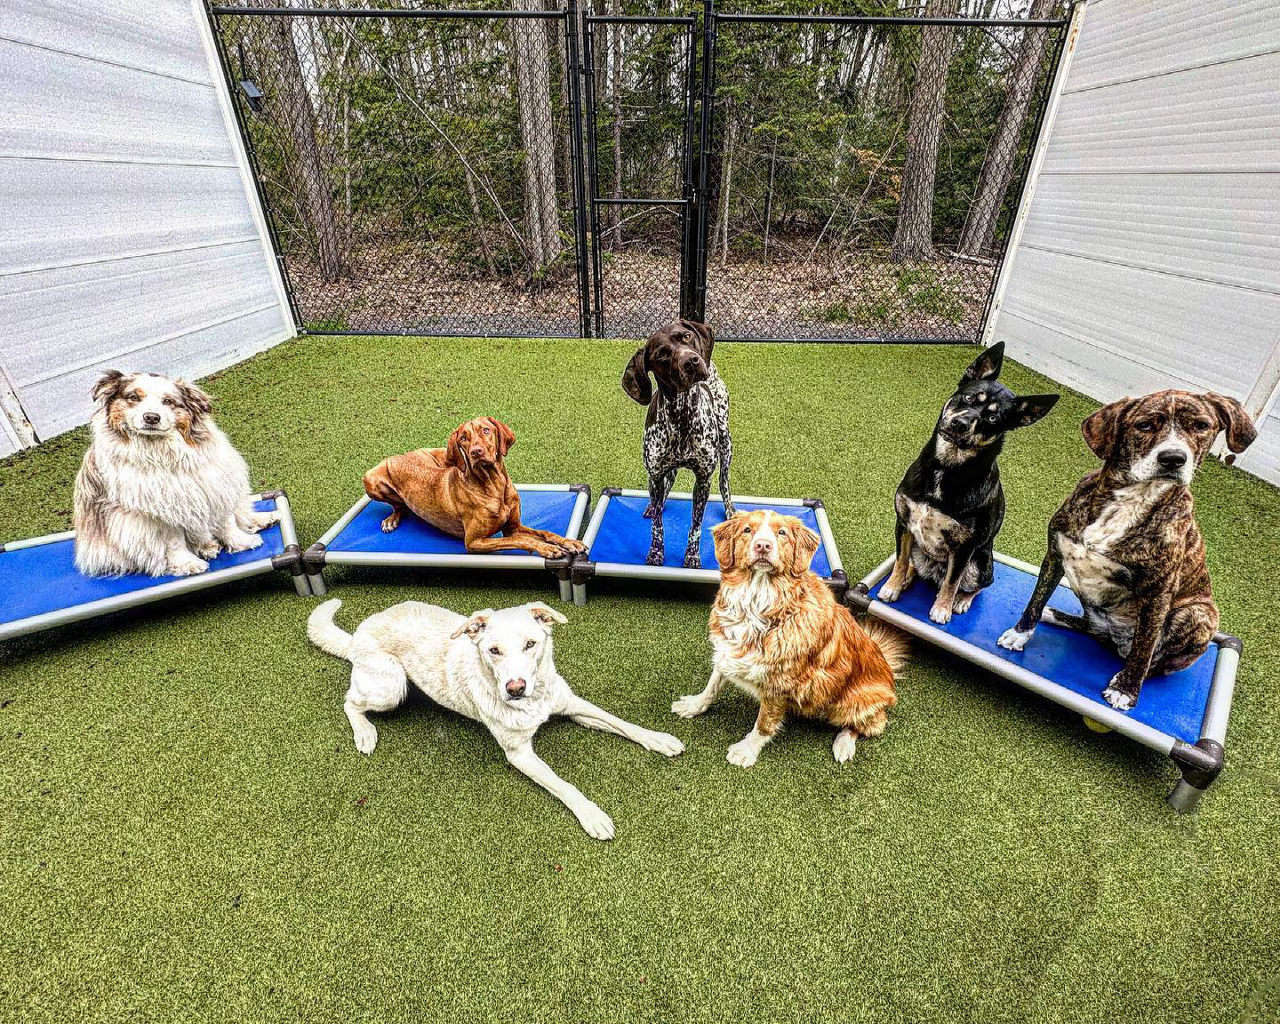 Seven dogs sitting and standing by each other.